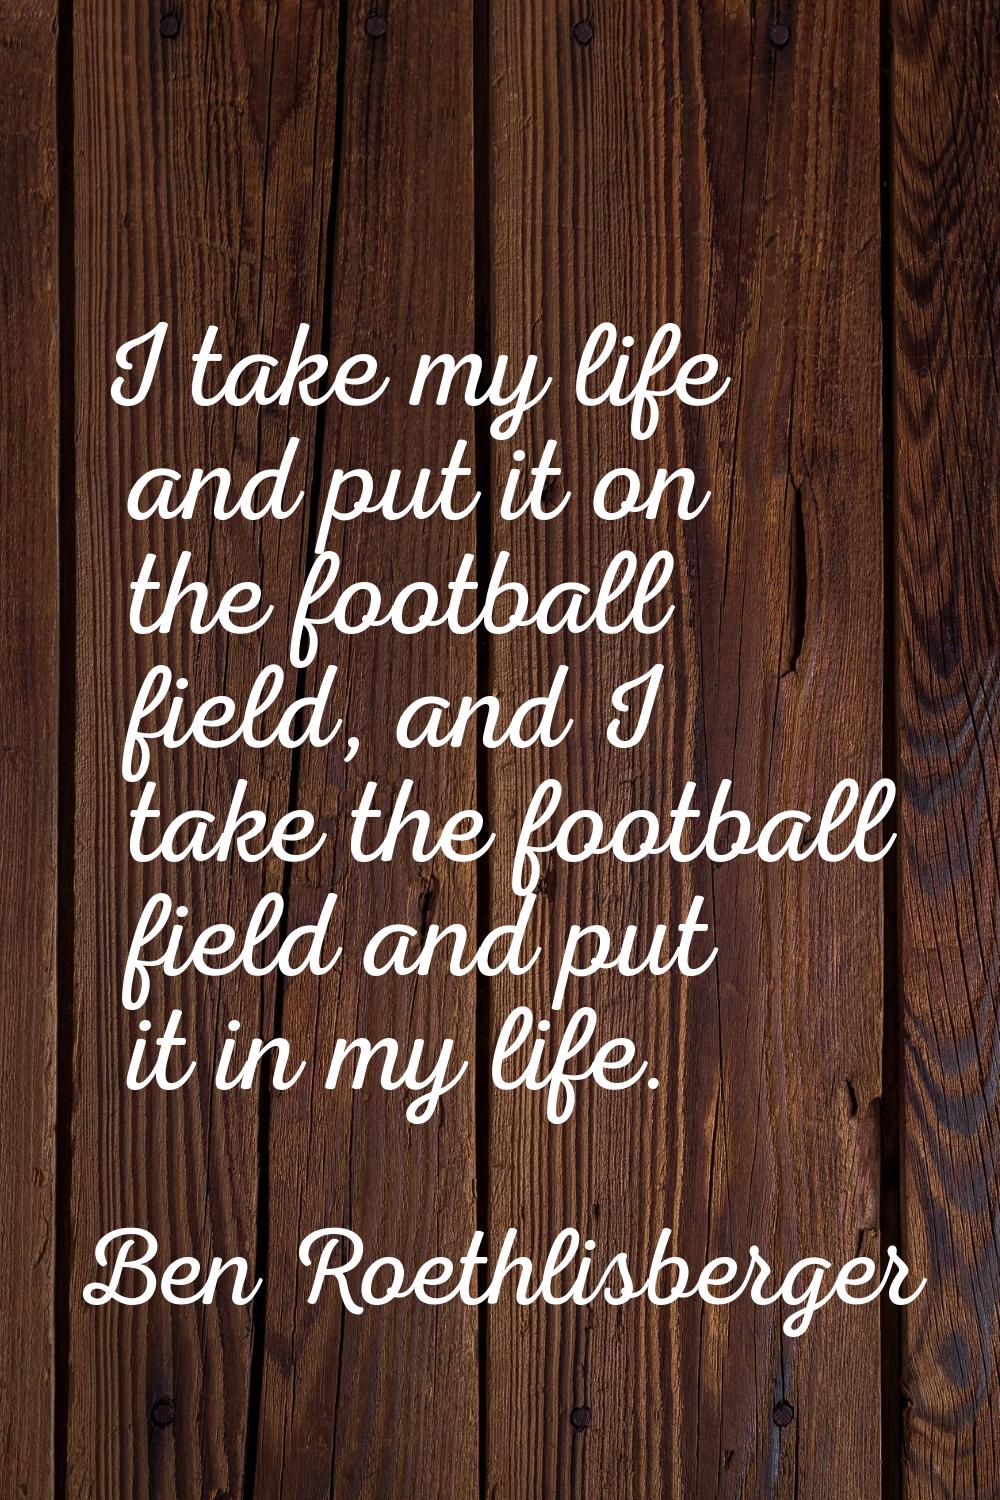 I take my life and put it on the football field, and I take the football field and put it in my lif